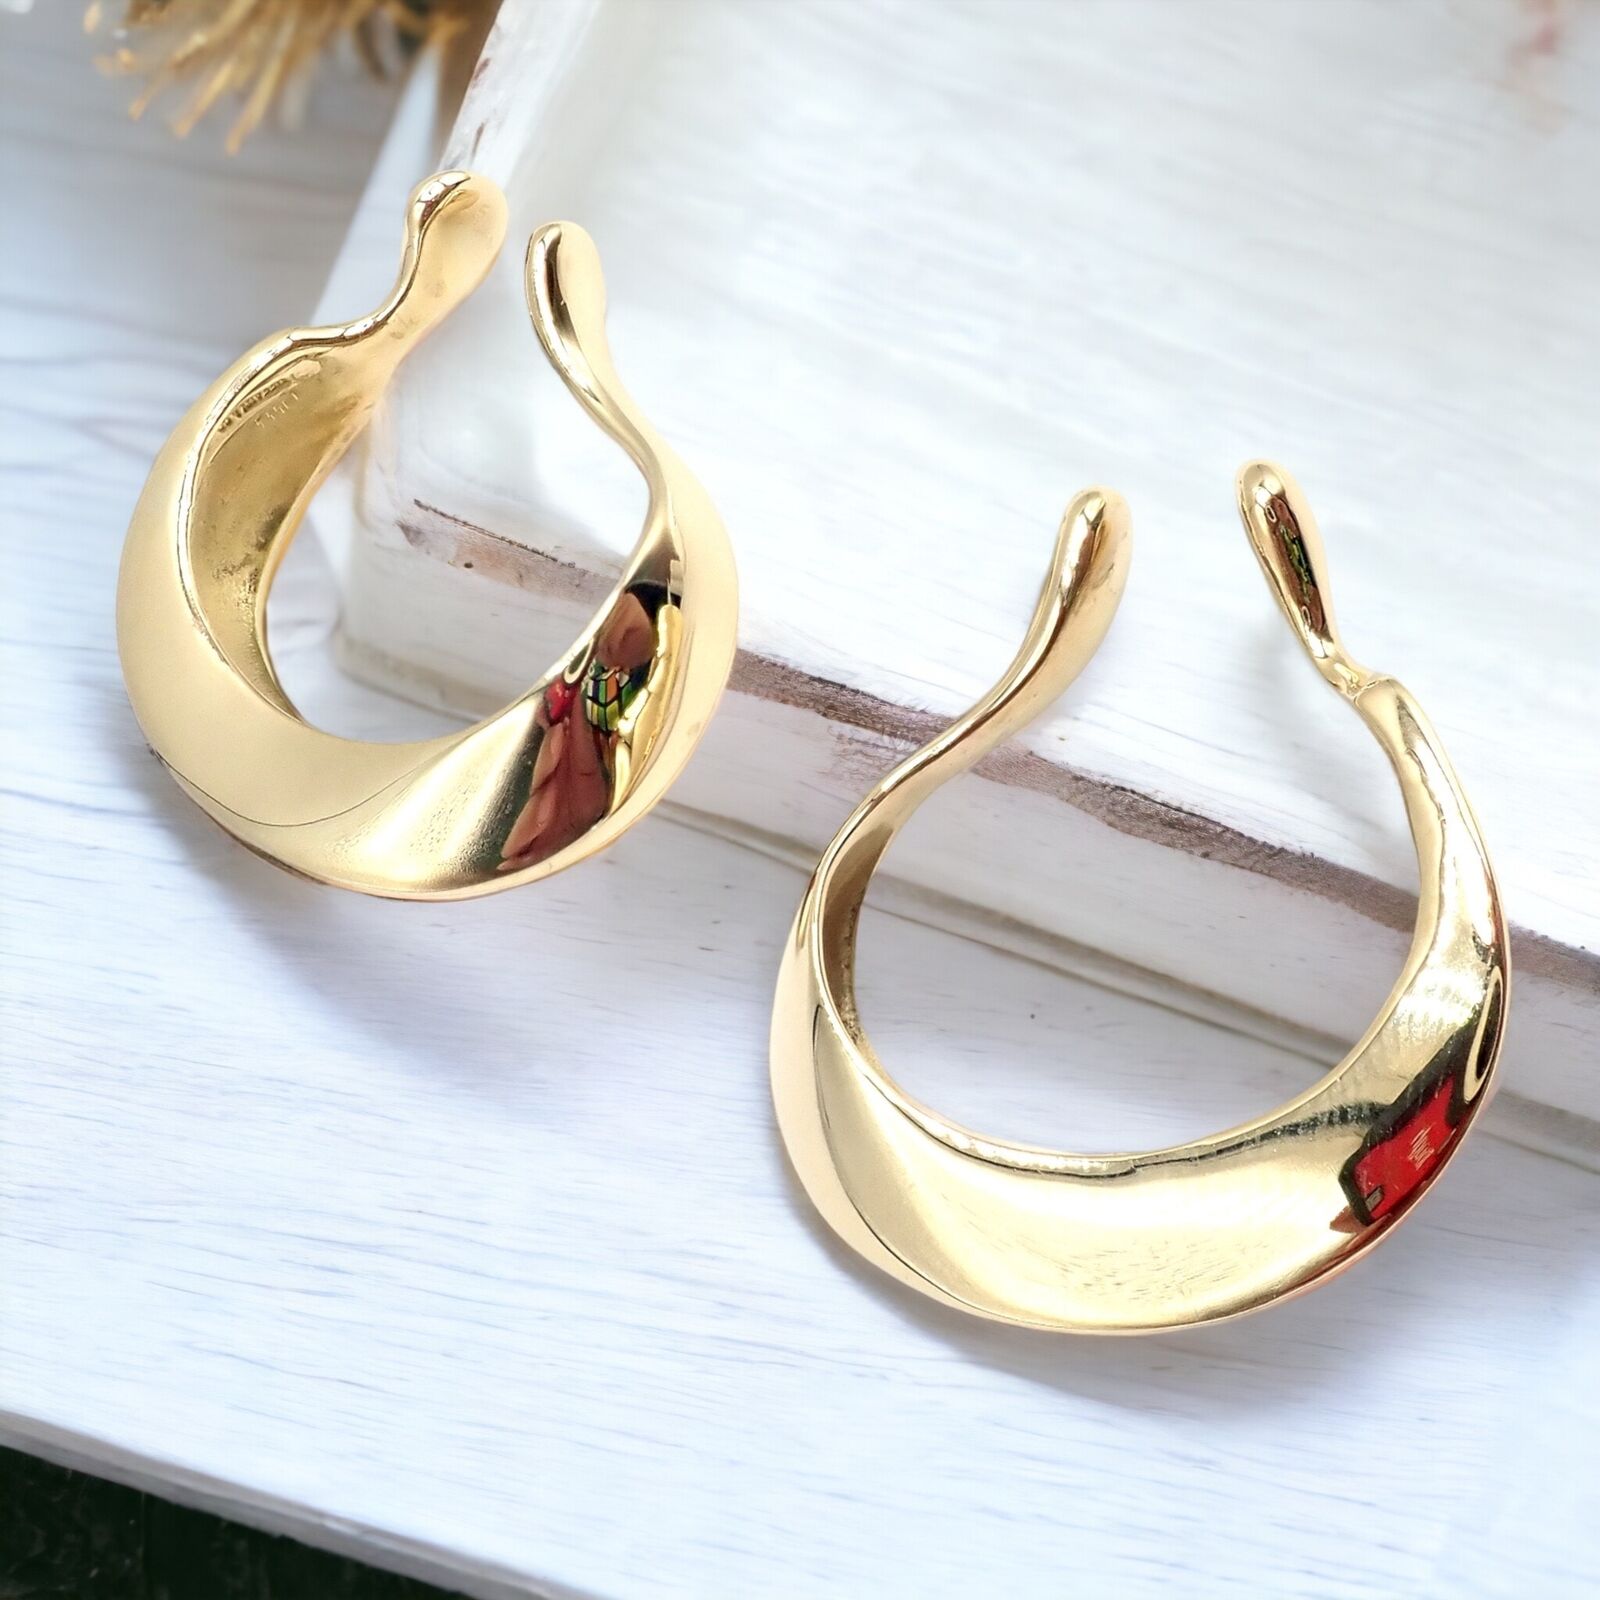 Authentic Vintage Tiffany u0026 Co 18k Yellow Gold Peretti Lily Lobe Hoop  Earrings | Fortrove